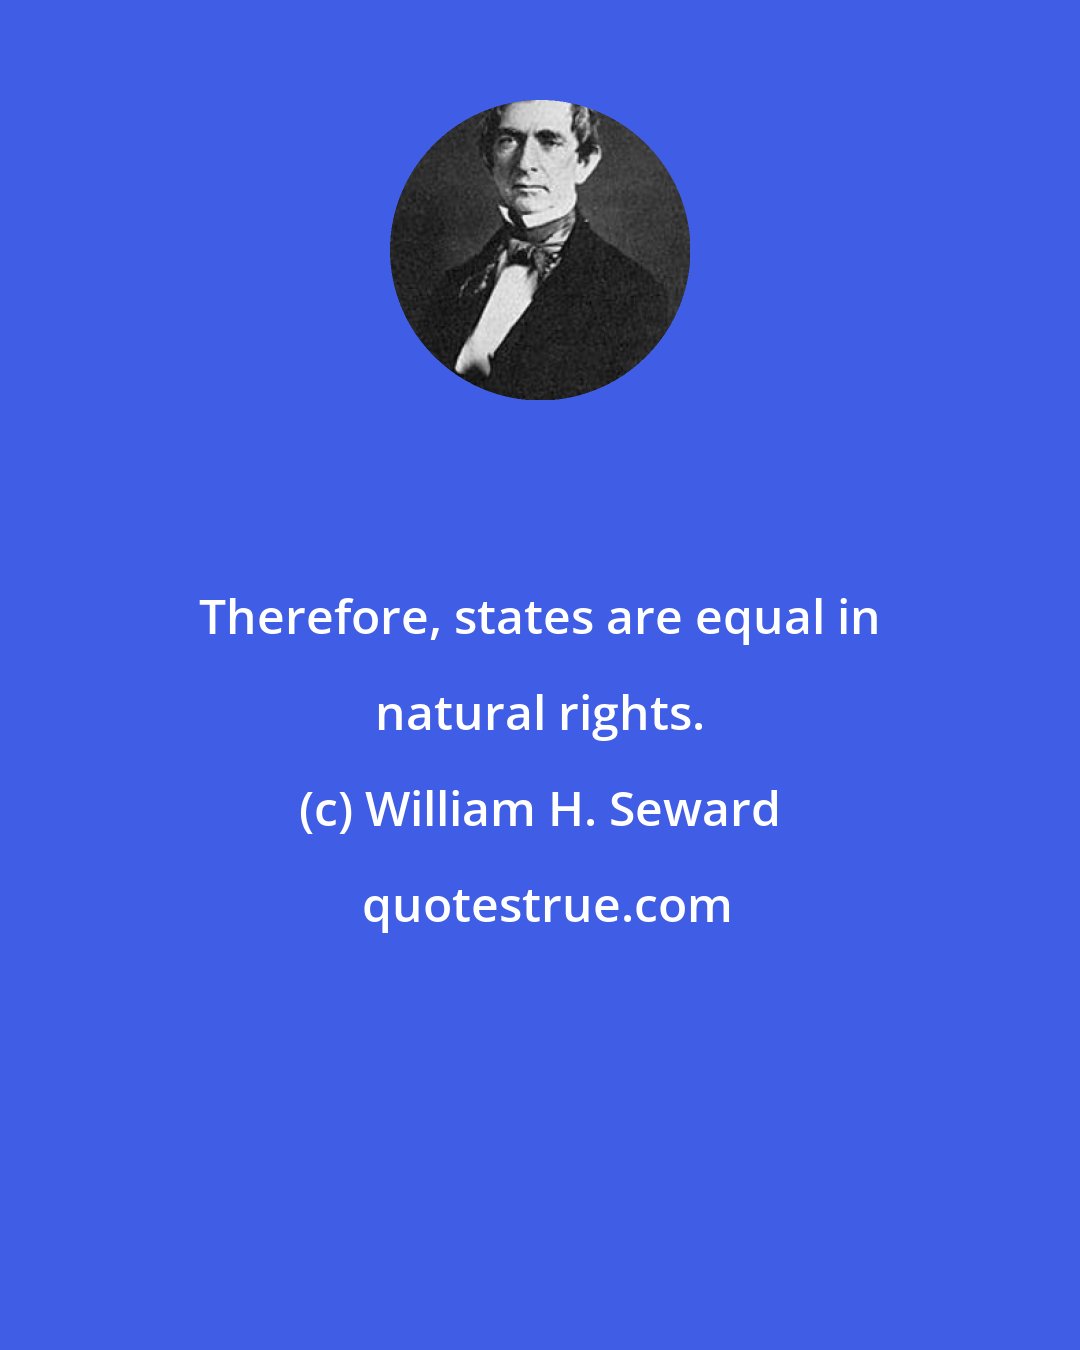 William H. Seward: Therefore, states are equal in natural rights.